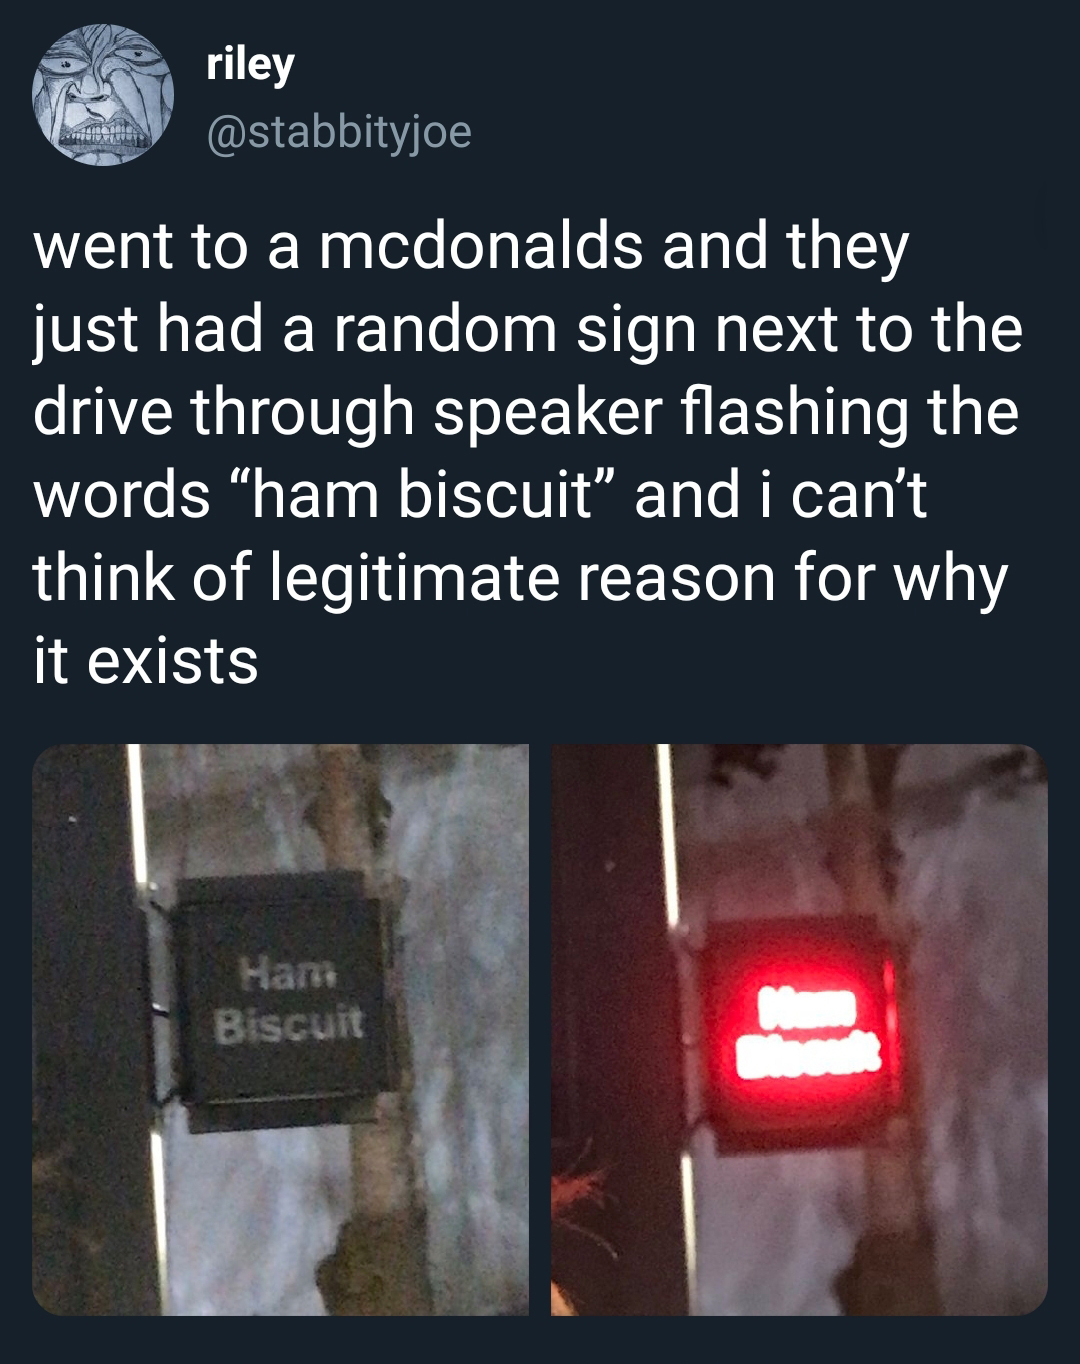 lyrics - riley went to a mcdonalds and they just had a random sign next to the drive through speaker flashing the words "ham biscuit" and i can't think of legitimate reason for why it exists Ham Biscuit